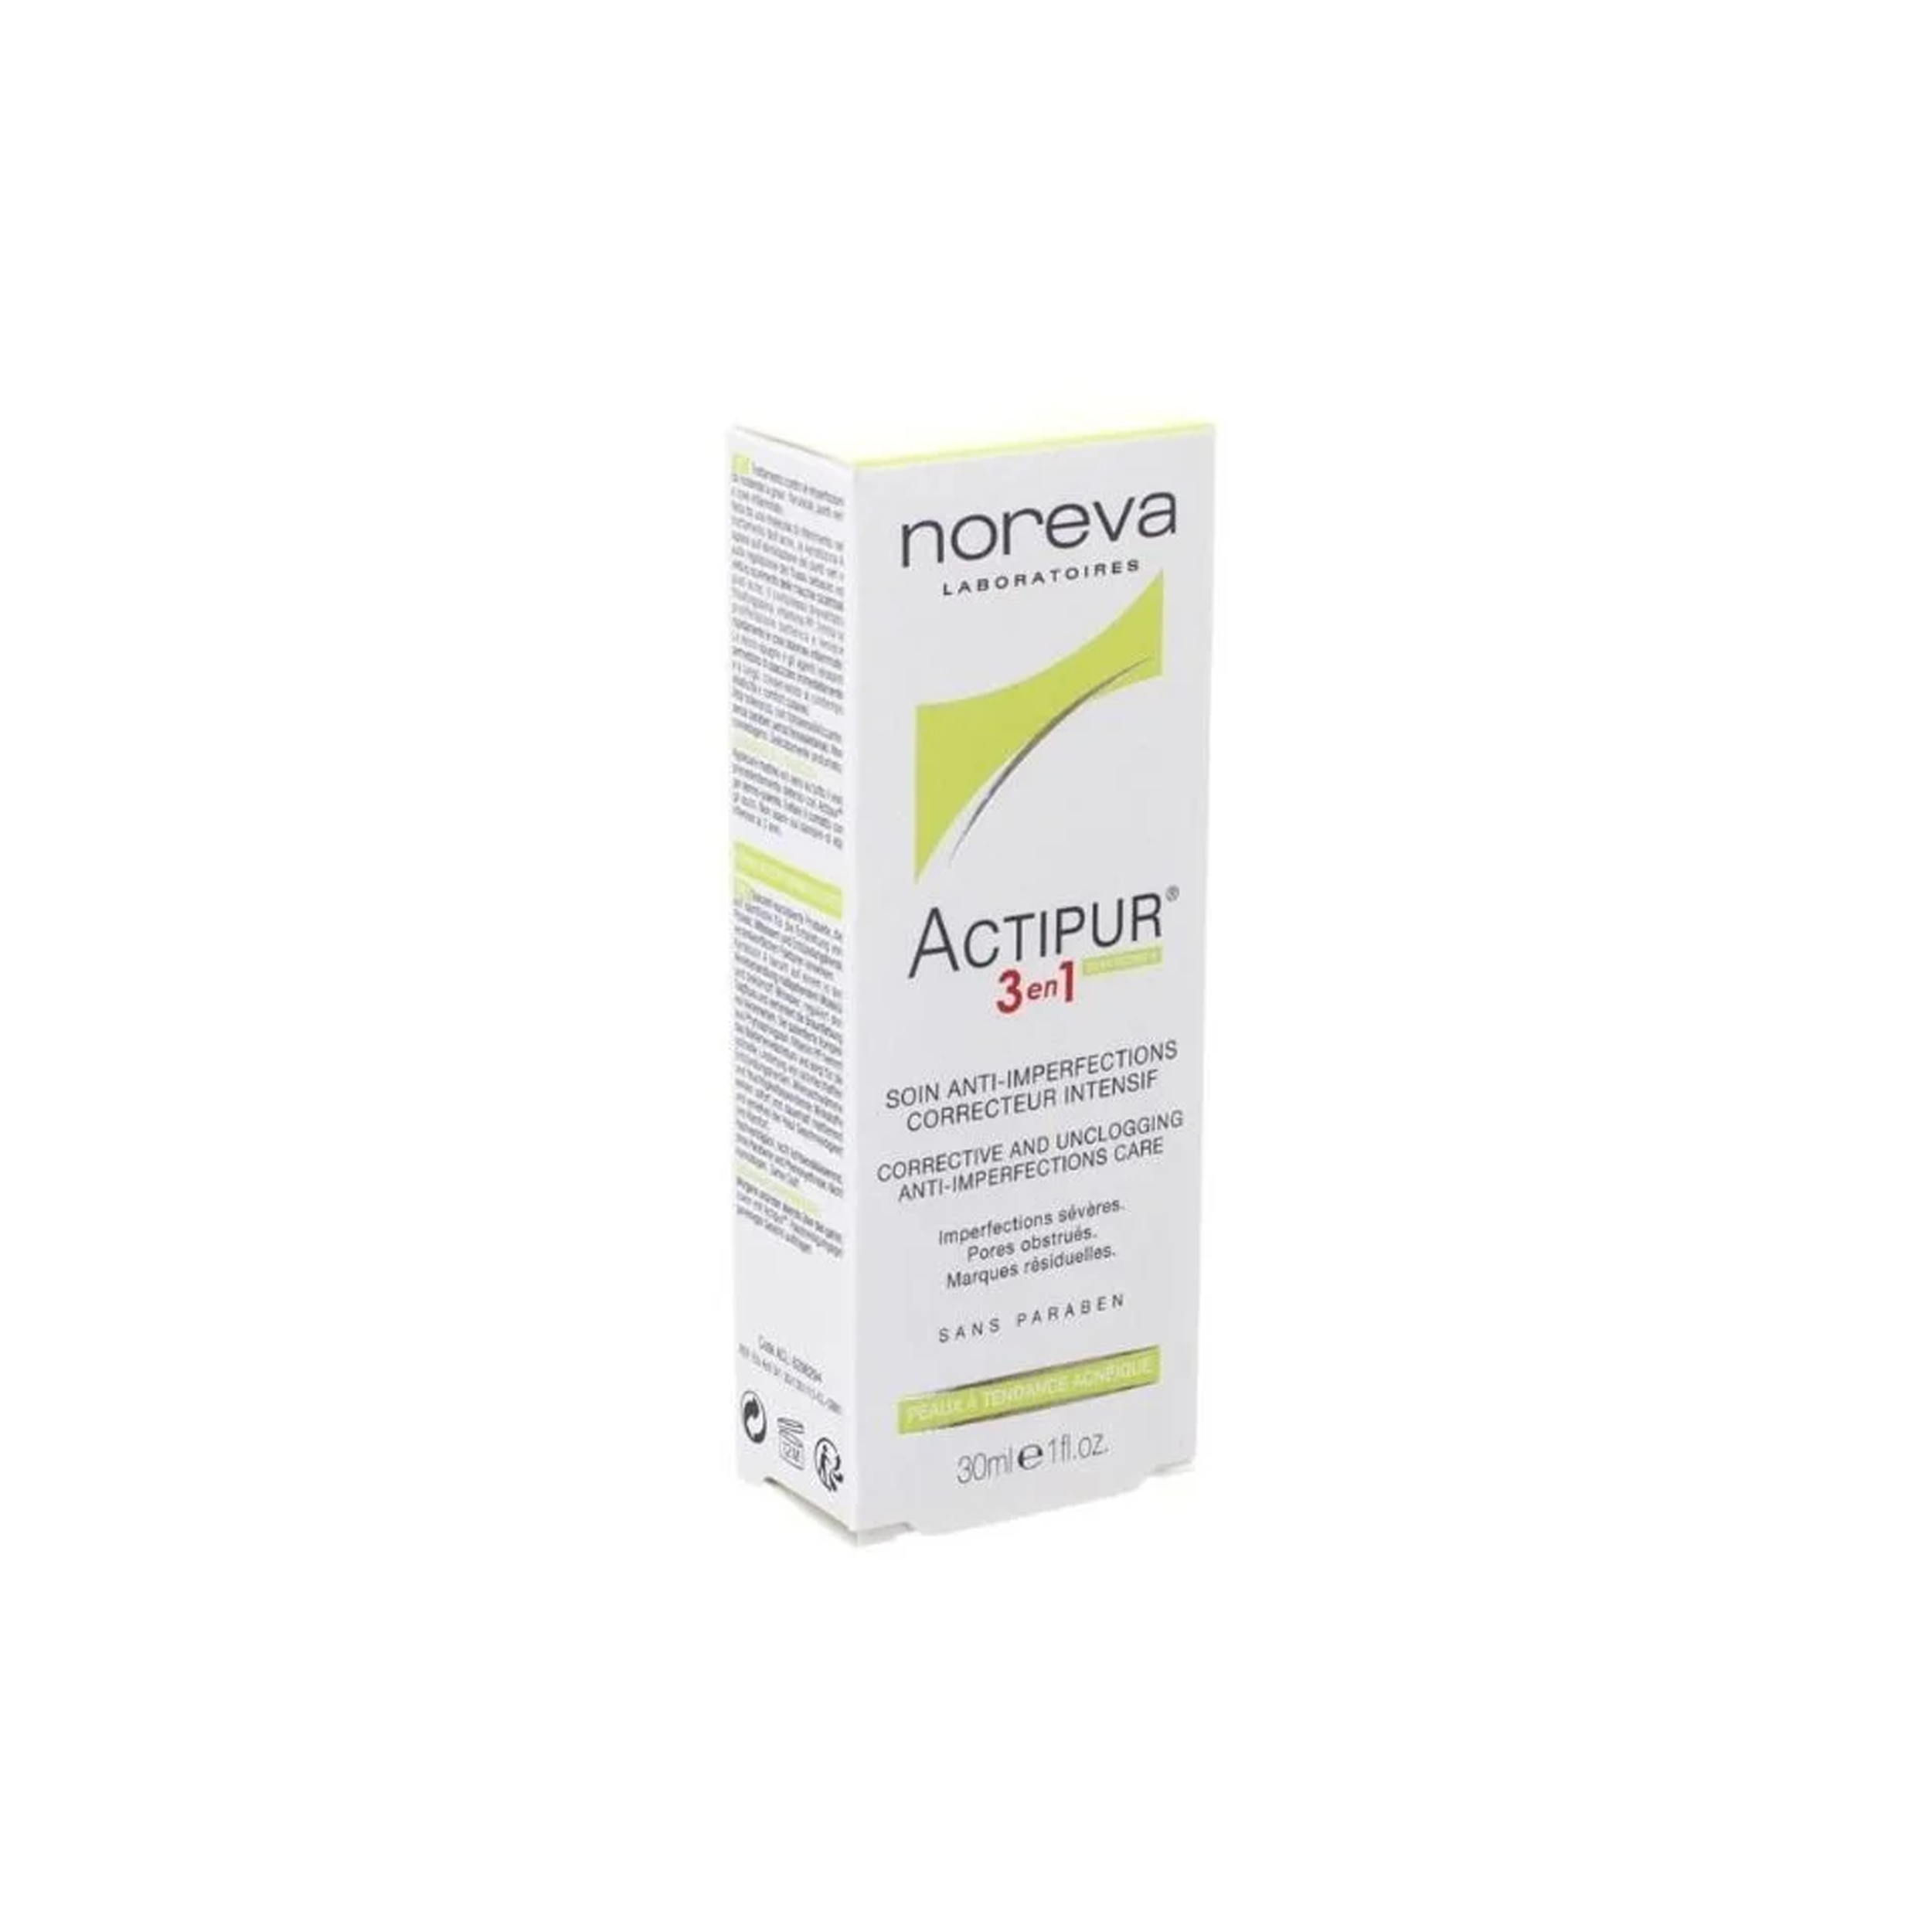 Noreva Actipur 3in1 Corrective Anti-Imperfections Care 30ml